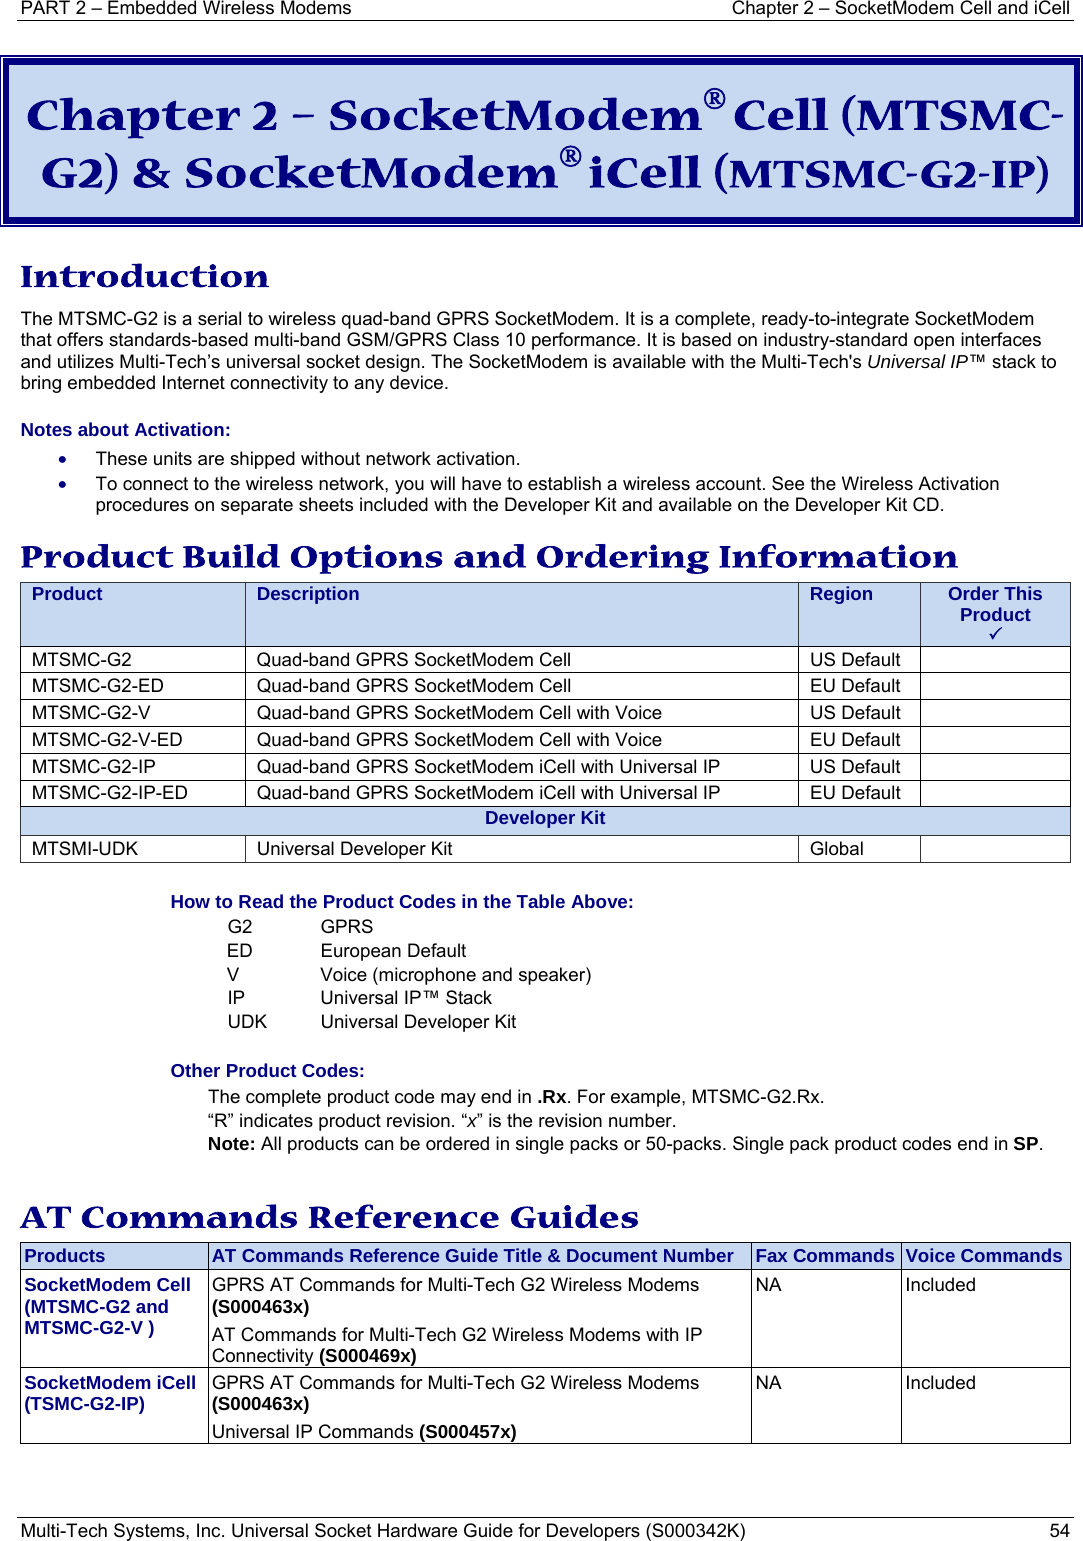 PART 2 – Embedded Wireless Modems   Chapter 2 – SocketModem Cell and iCell Multi-Tech Systems, Inc. Universal Socket Hardware Guide for Developers (S000342K)  54  Chapter 2 – SocketModem® Cell (MTSMC-G2) &amp; SocketModem® iCell (MTSMC-G2-IP)  Introduction The MTSMC-G2 is a serial to wireless quad-band GPRS SocketModem. It is a complete, ready-to-integrate SocketModem that offers standards-based multi-band GSM/GPRS Class 10 performance. It is based on industry-standard open interfaces and utilizes Multi-Tech’s universal socket design. The SocketModem is available with the Multi-Tech&apos;s Universal IP™ stack to bring embedded Internet connectivity to any device.  Notes about Activation:  • These units are shipped without network activation.  • To connect to the wireless network, you will have to establish a wireless account. See the Wireless Activation procedures on separate sheets included with the Developer Kit and available on the Developer Kit CD. Product Build Options and Ordering Information Product  Description  Region  Order This Product 3MTSMC-G2  Quad-band GPRS SocketModem Cell   US Default   MTSMC-G2-ED  Quad-band GPRS SocketModem Cell   EU Default   MTSMC-G2-V  Quad-band GPRS SocketModem Cell with Voice   US Default   MTSMC-G2-V-ED  Quad-band GPRS SocketModem Cell with Voice   EU Default   MTSMC-G2-IP  Quad-band GPRS SocketModem iCell with Universal IP   US Default   MTSMC-G2-IP-ED  Quad-band GPRS SocketModem iCell with Universal IP   EU Default   Developer KitMTSMI-UDK  Universal Developer Kit  Global    How to Read the Product Codes in the Table Above: G2 GPRS ED European Default V  Voice (microphone and speaker) IP  Universal IP™ Stack  UDK  Universal Developer Kit  Other Product Codes: The complete product code may end in .Rx. For example, MTSMC-G2.Rx.   “R” indicates product revision. “x” is the revision number. Note: All products can be ordered in single packs or 50-packs. Single pack product codes end in SP.  AT Commands Reference Guides Products  AT Commands Reference Guide Title &amp; Document Number  Fax Commands  Voice CommandsSocketModem Cell (MTSMC-G2 and MTSMC-G2-V ) GPRS AT Commands for Multi-Tech G2 Wireless Modems (S000463x) AT Commands for Multi-Tech G2 Wireless Modems with IP Connectivity (S000469x) NA Included  SocketModem iCell (TSMC-G2-IP)  GPRS AT Commands for Multi-Tech G2 Wireless Modems (S000463x) Universal IP Commands (S000457x) NA Included   